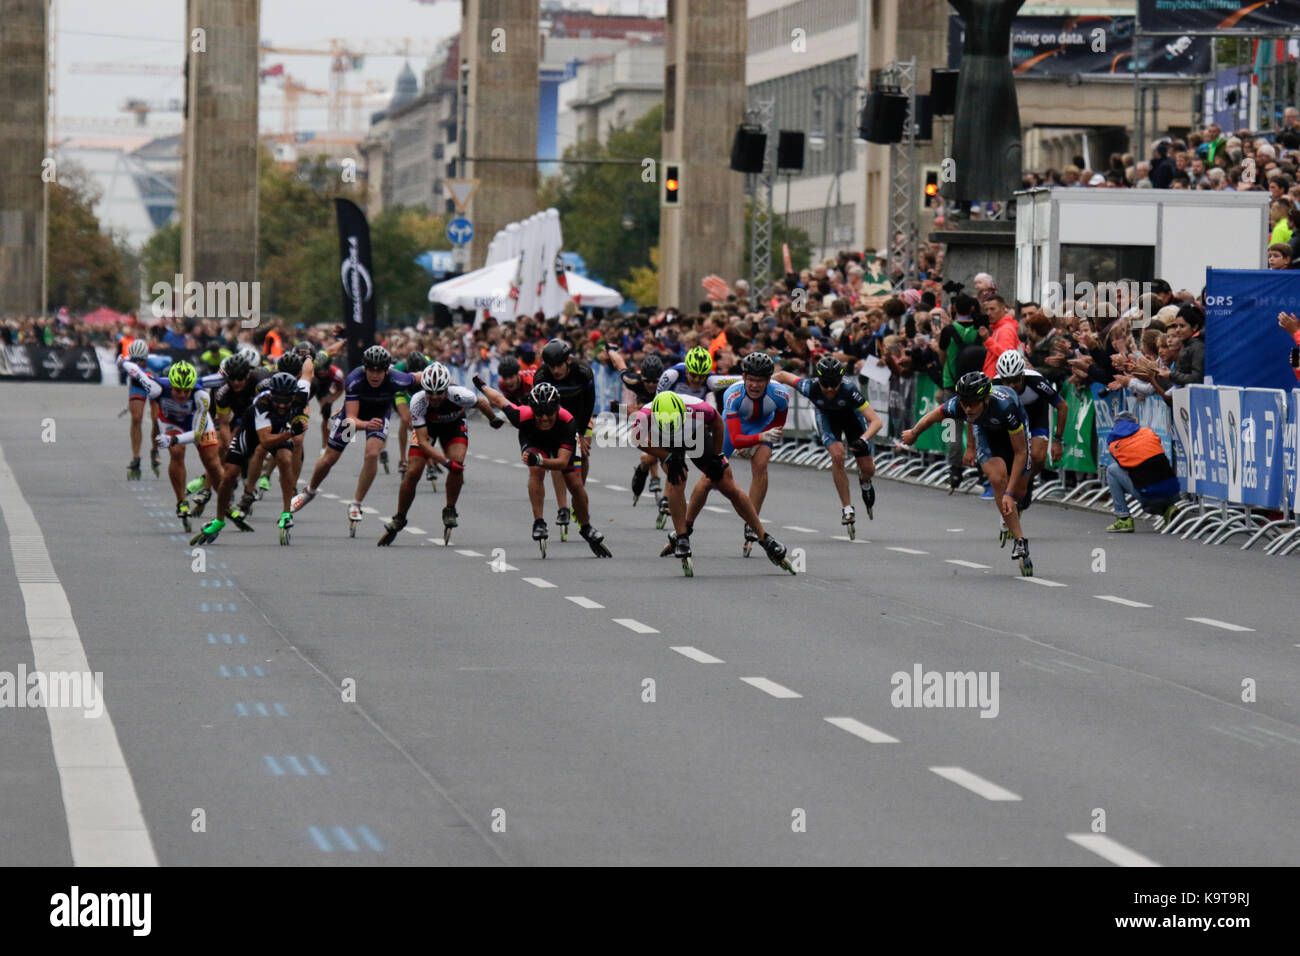 Berlin, Germany. 23rd Sep, 2017. Second place Patxi Peula from Spain crosses the finishing line.Skaters race the last meters of the course from the Brandenburg Gate to the finishing line. Over 5,500 skater took part in the 2017 BMW Berlin Marathon Inline skating race, a day ahead of the Marathon race. Bart Swings from Belgium won the race in 58:42 for the 5th year in a row. Credit: Michael Debets/Pacific Press/Alamy Live News Stock Photo